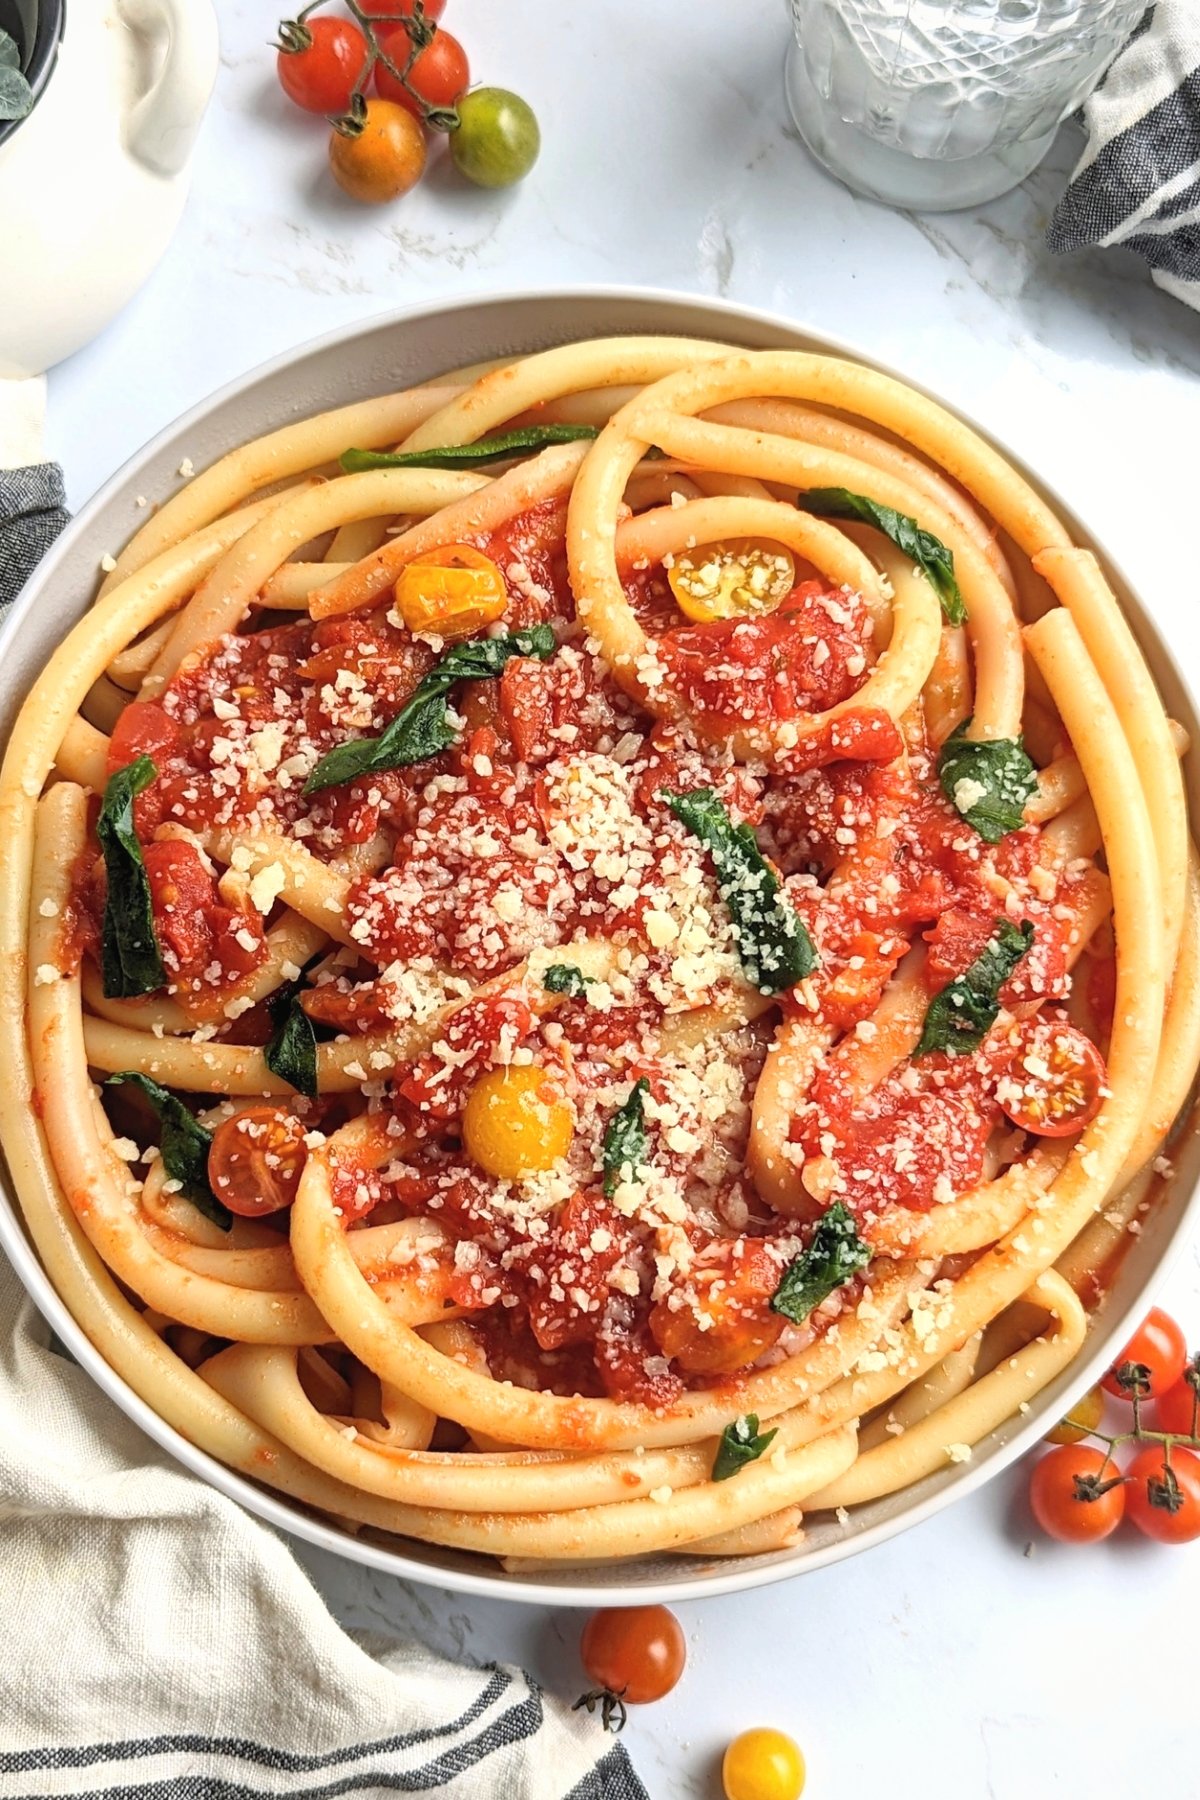 sauce for bucatini pasta recipe healthy vegetarian pasta sauce with fresh or canned tomatoes bucatini recipes no meat